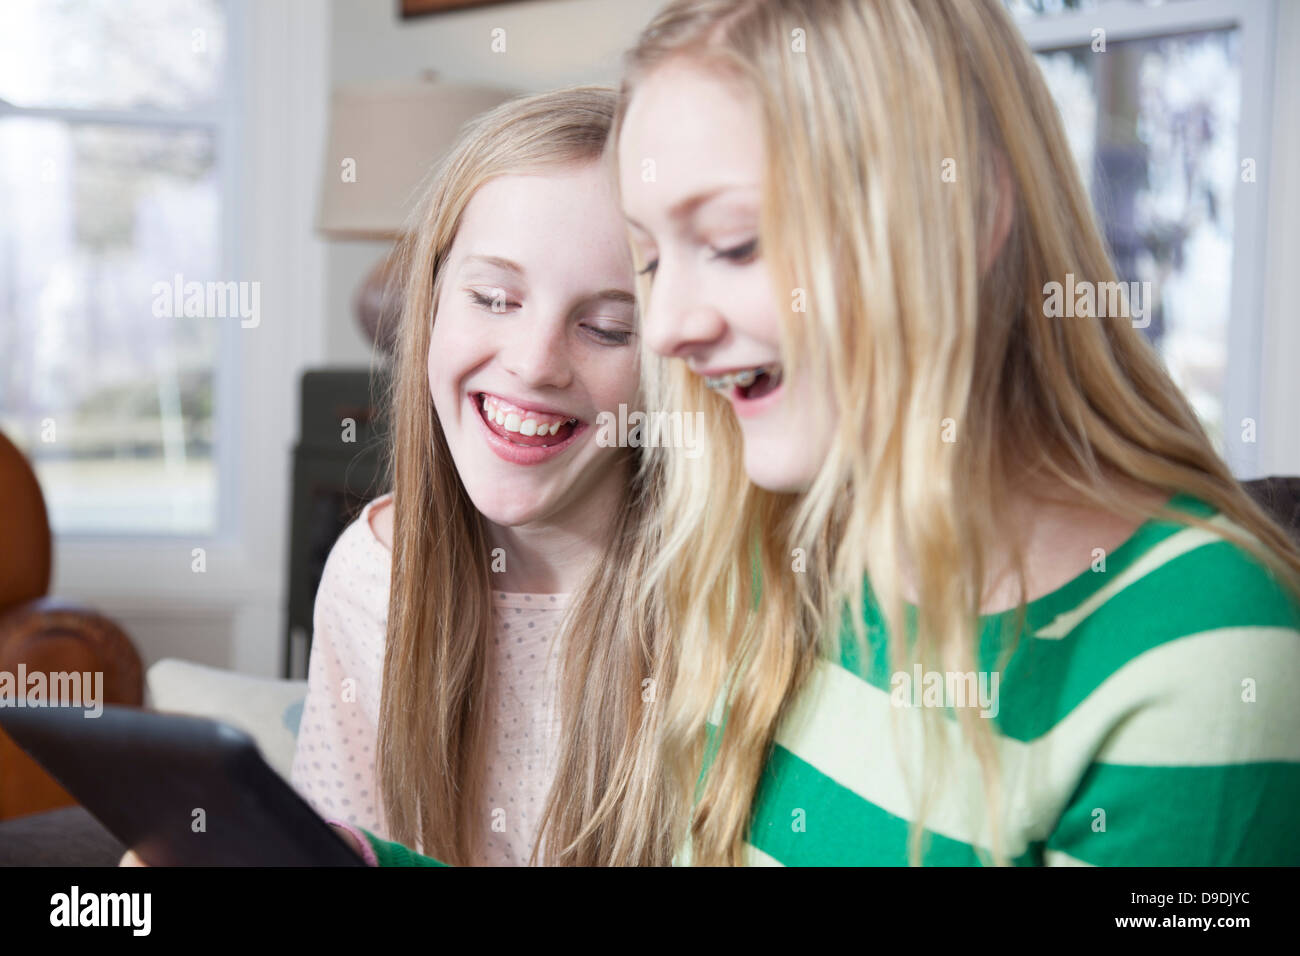 Girls sitting on sofa looking at digital tablet Banque D'Images